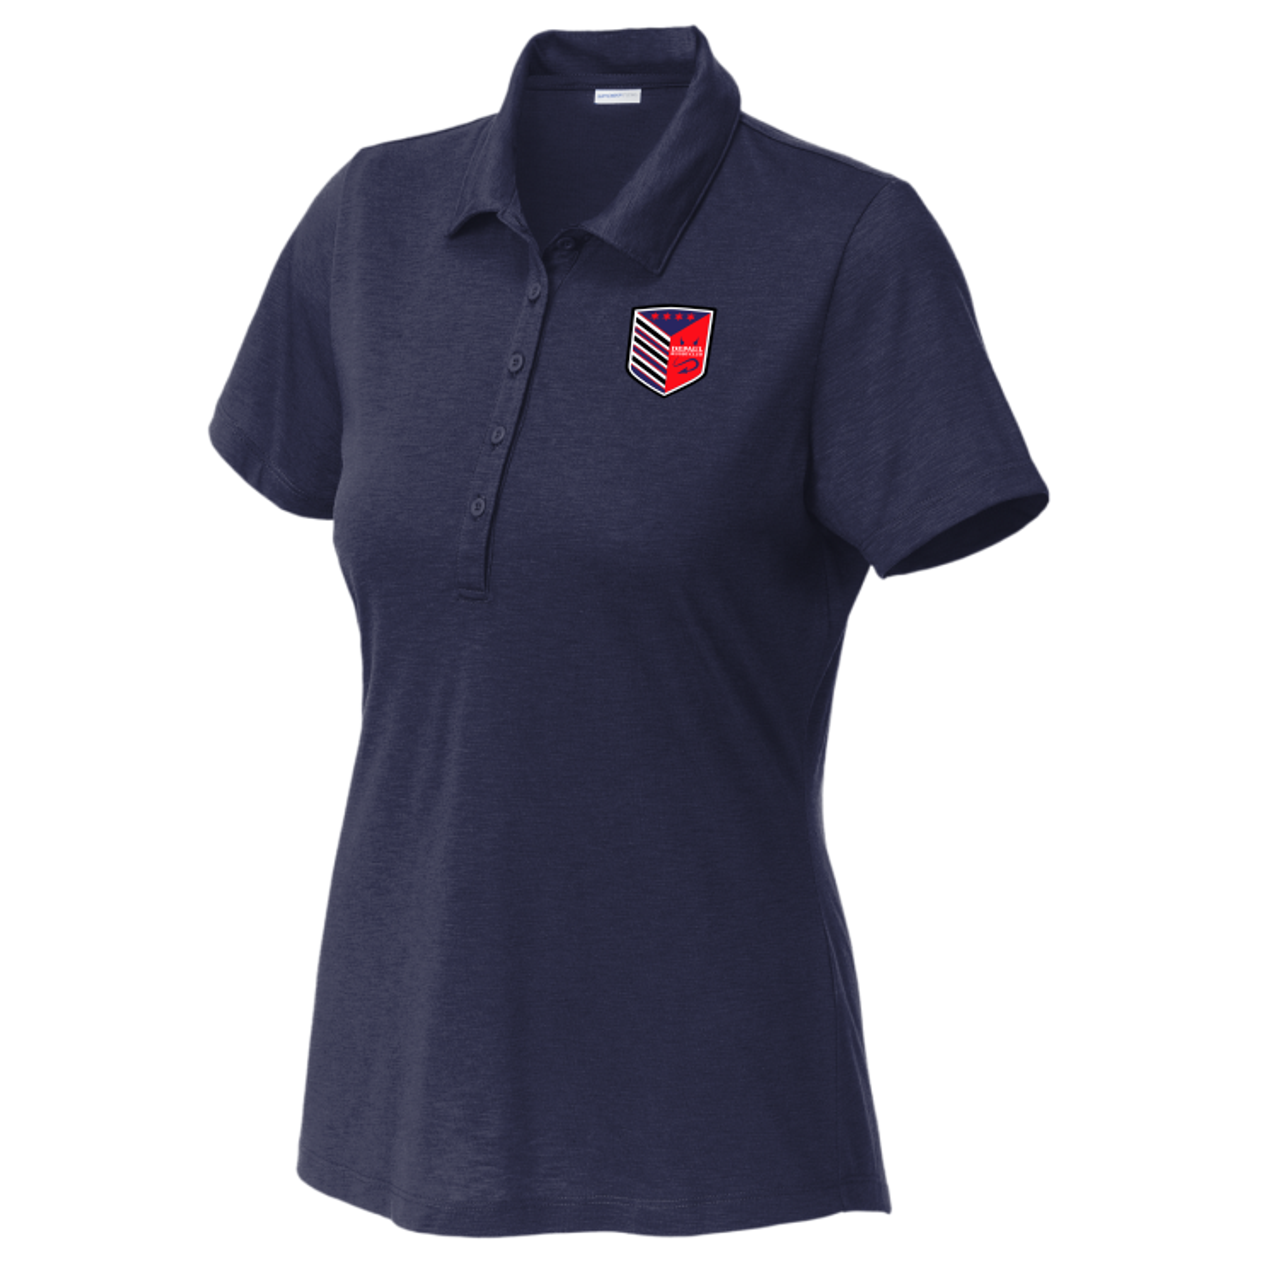 DePaul Rugby Performance Polo